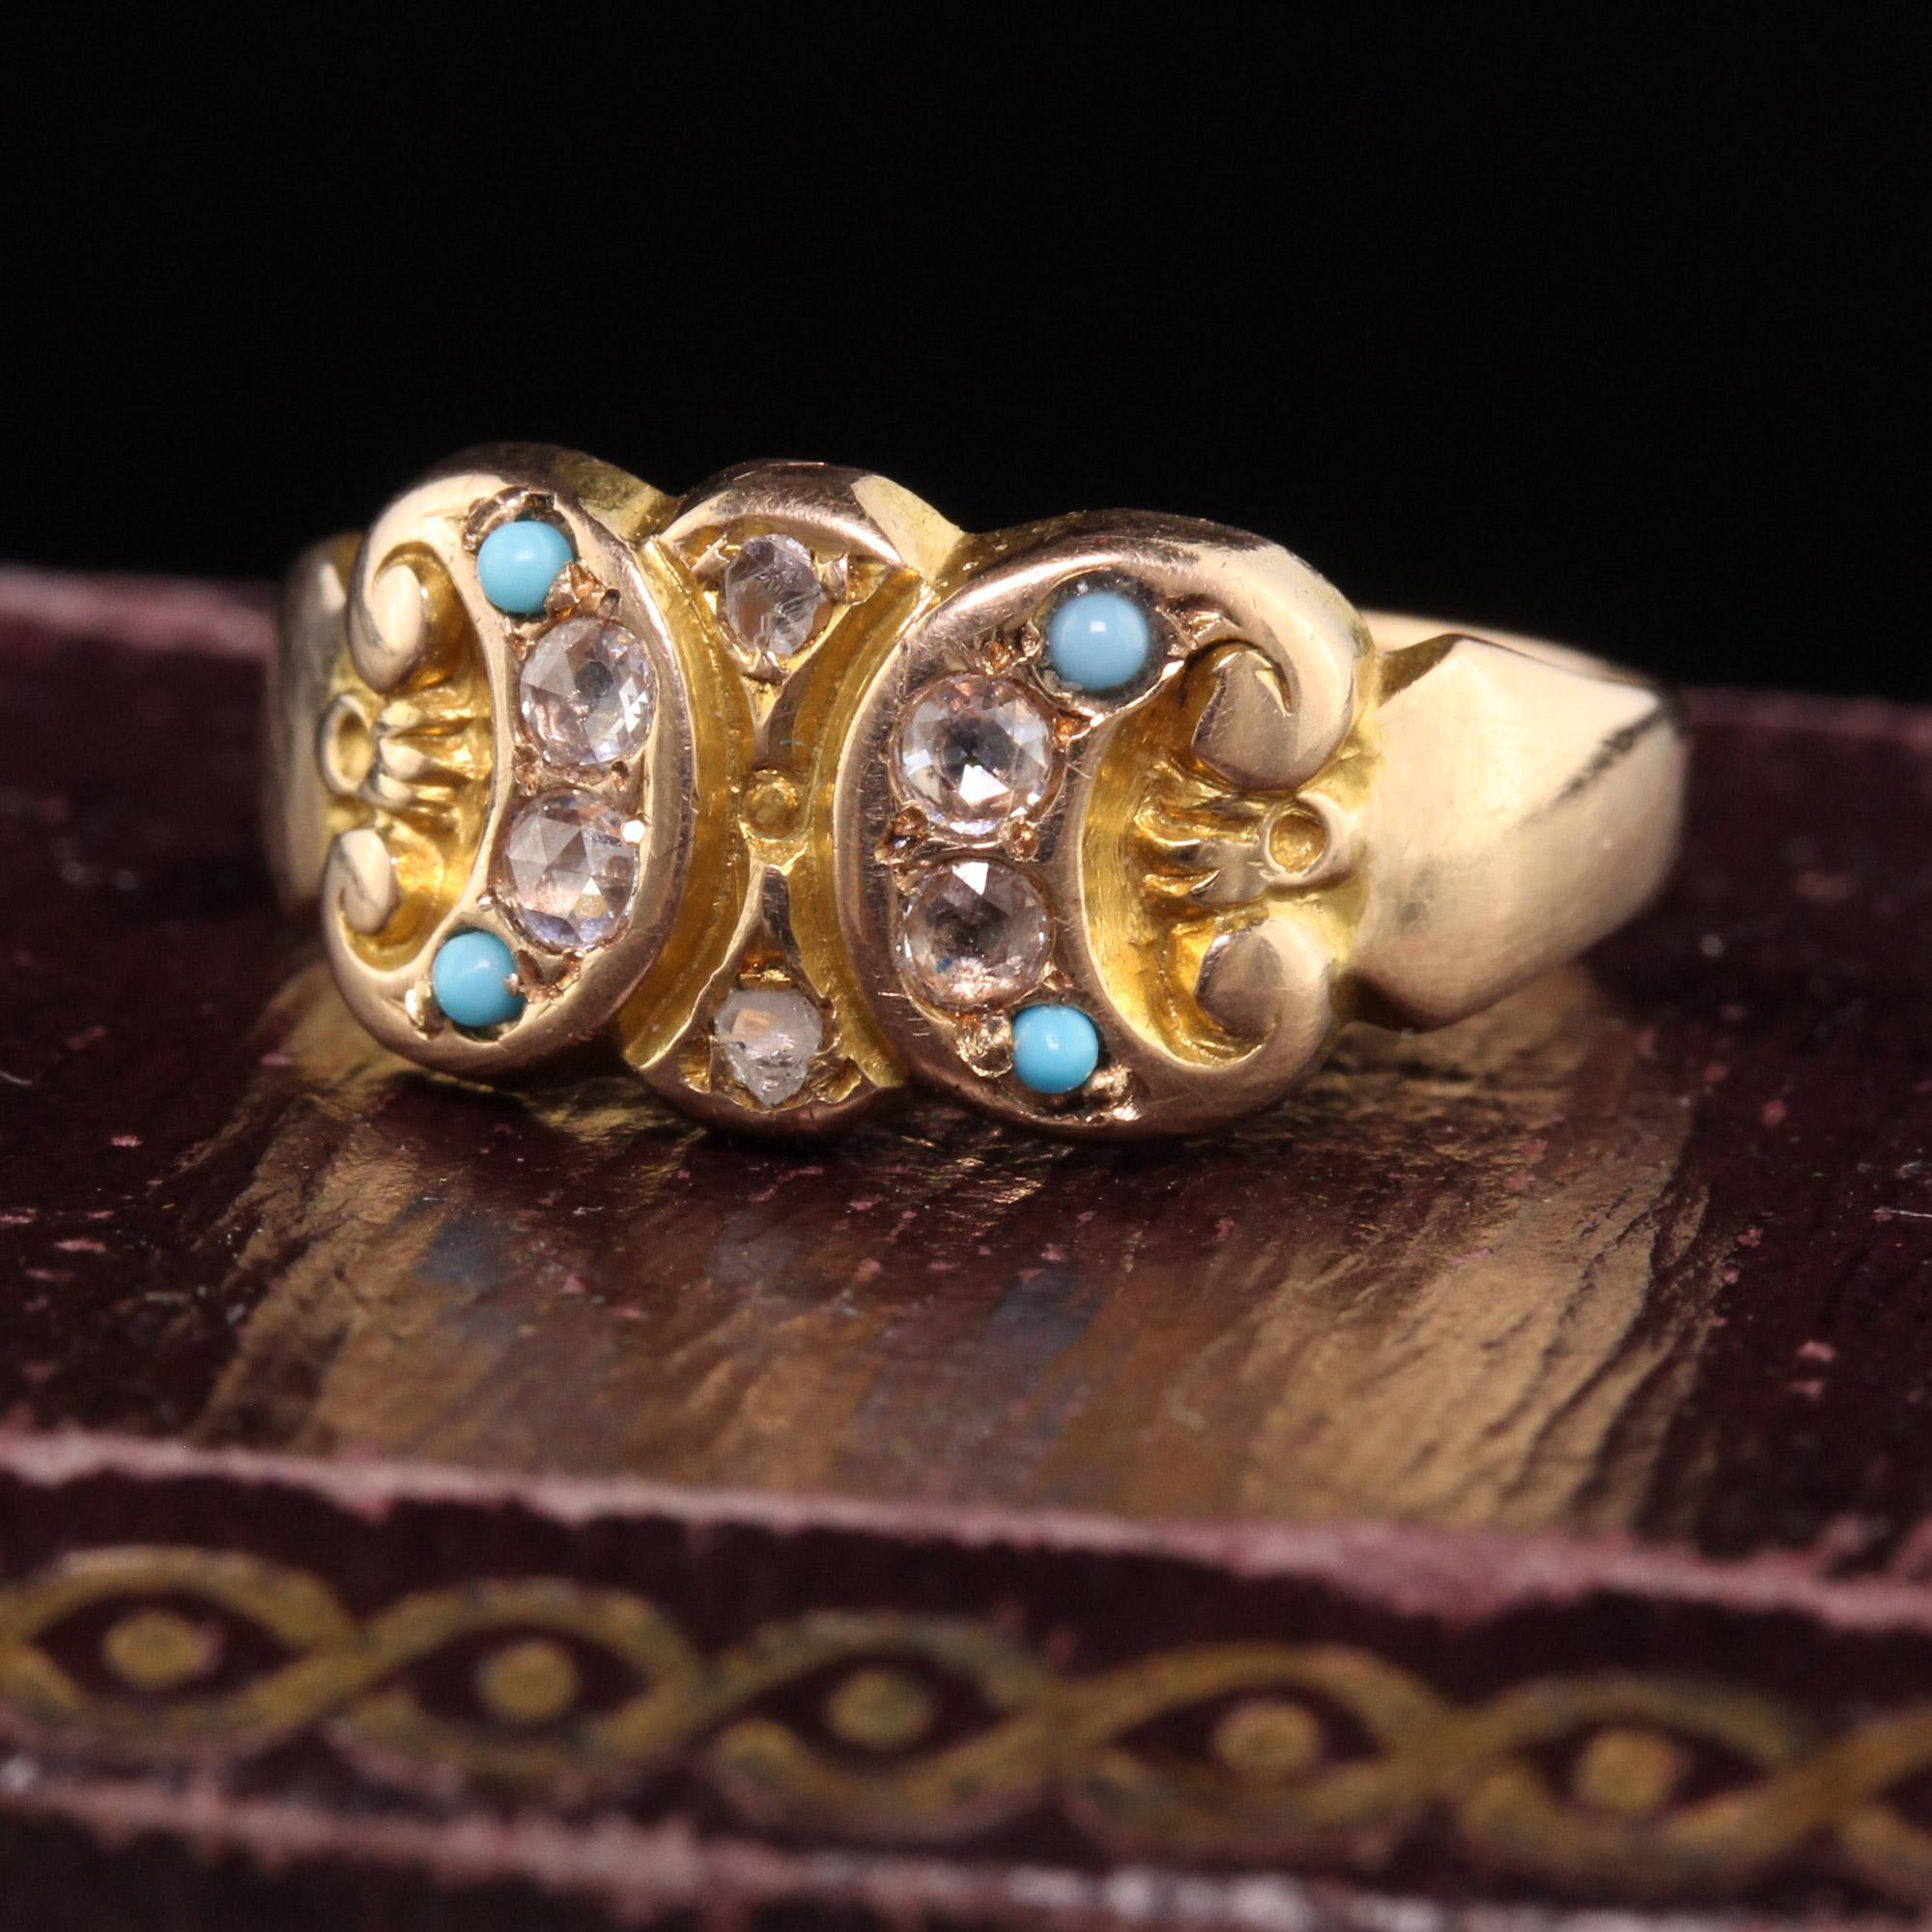 Beautiful Antique Victorian English 15K Yellow Gold Rose Cut Diamond and Turquoise Ring. This beautiful ring is crafted in 15K yellow gold. The ring has rose cut diamonds and turquoise set on top of the ring and has hallmarks inside the band.

Item